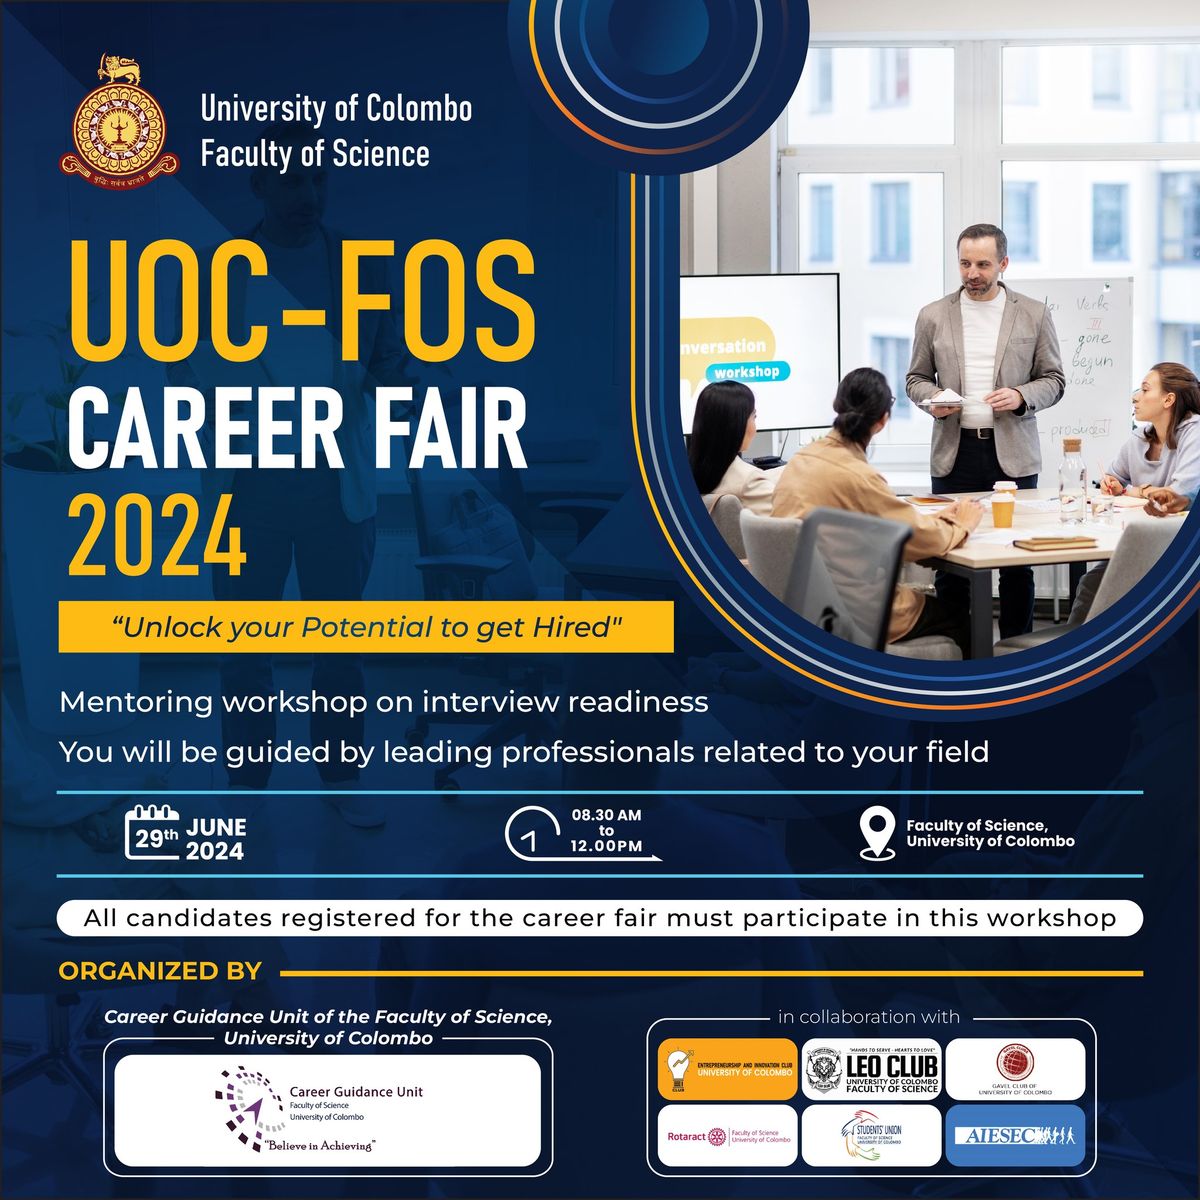 UOC FOS Career Fair 2024 - Mentoring Workshop on Interview Readiness